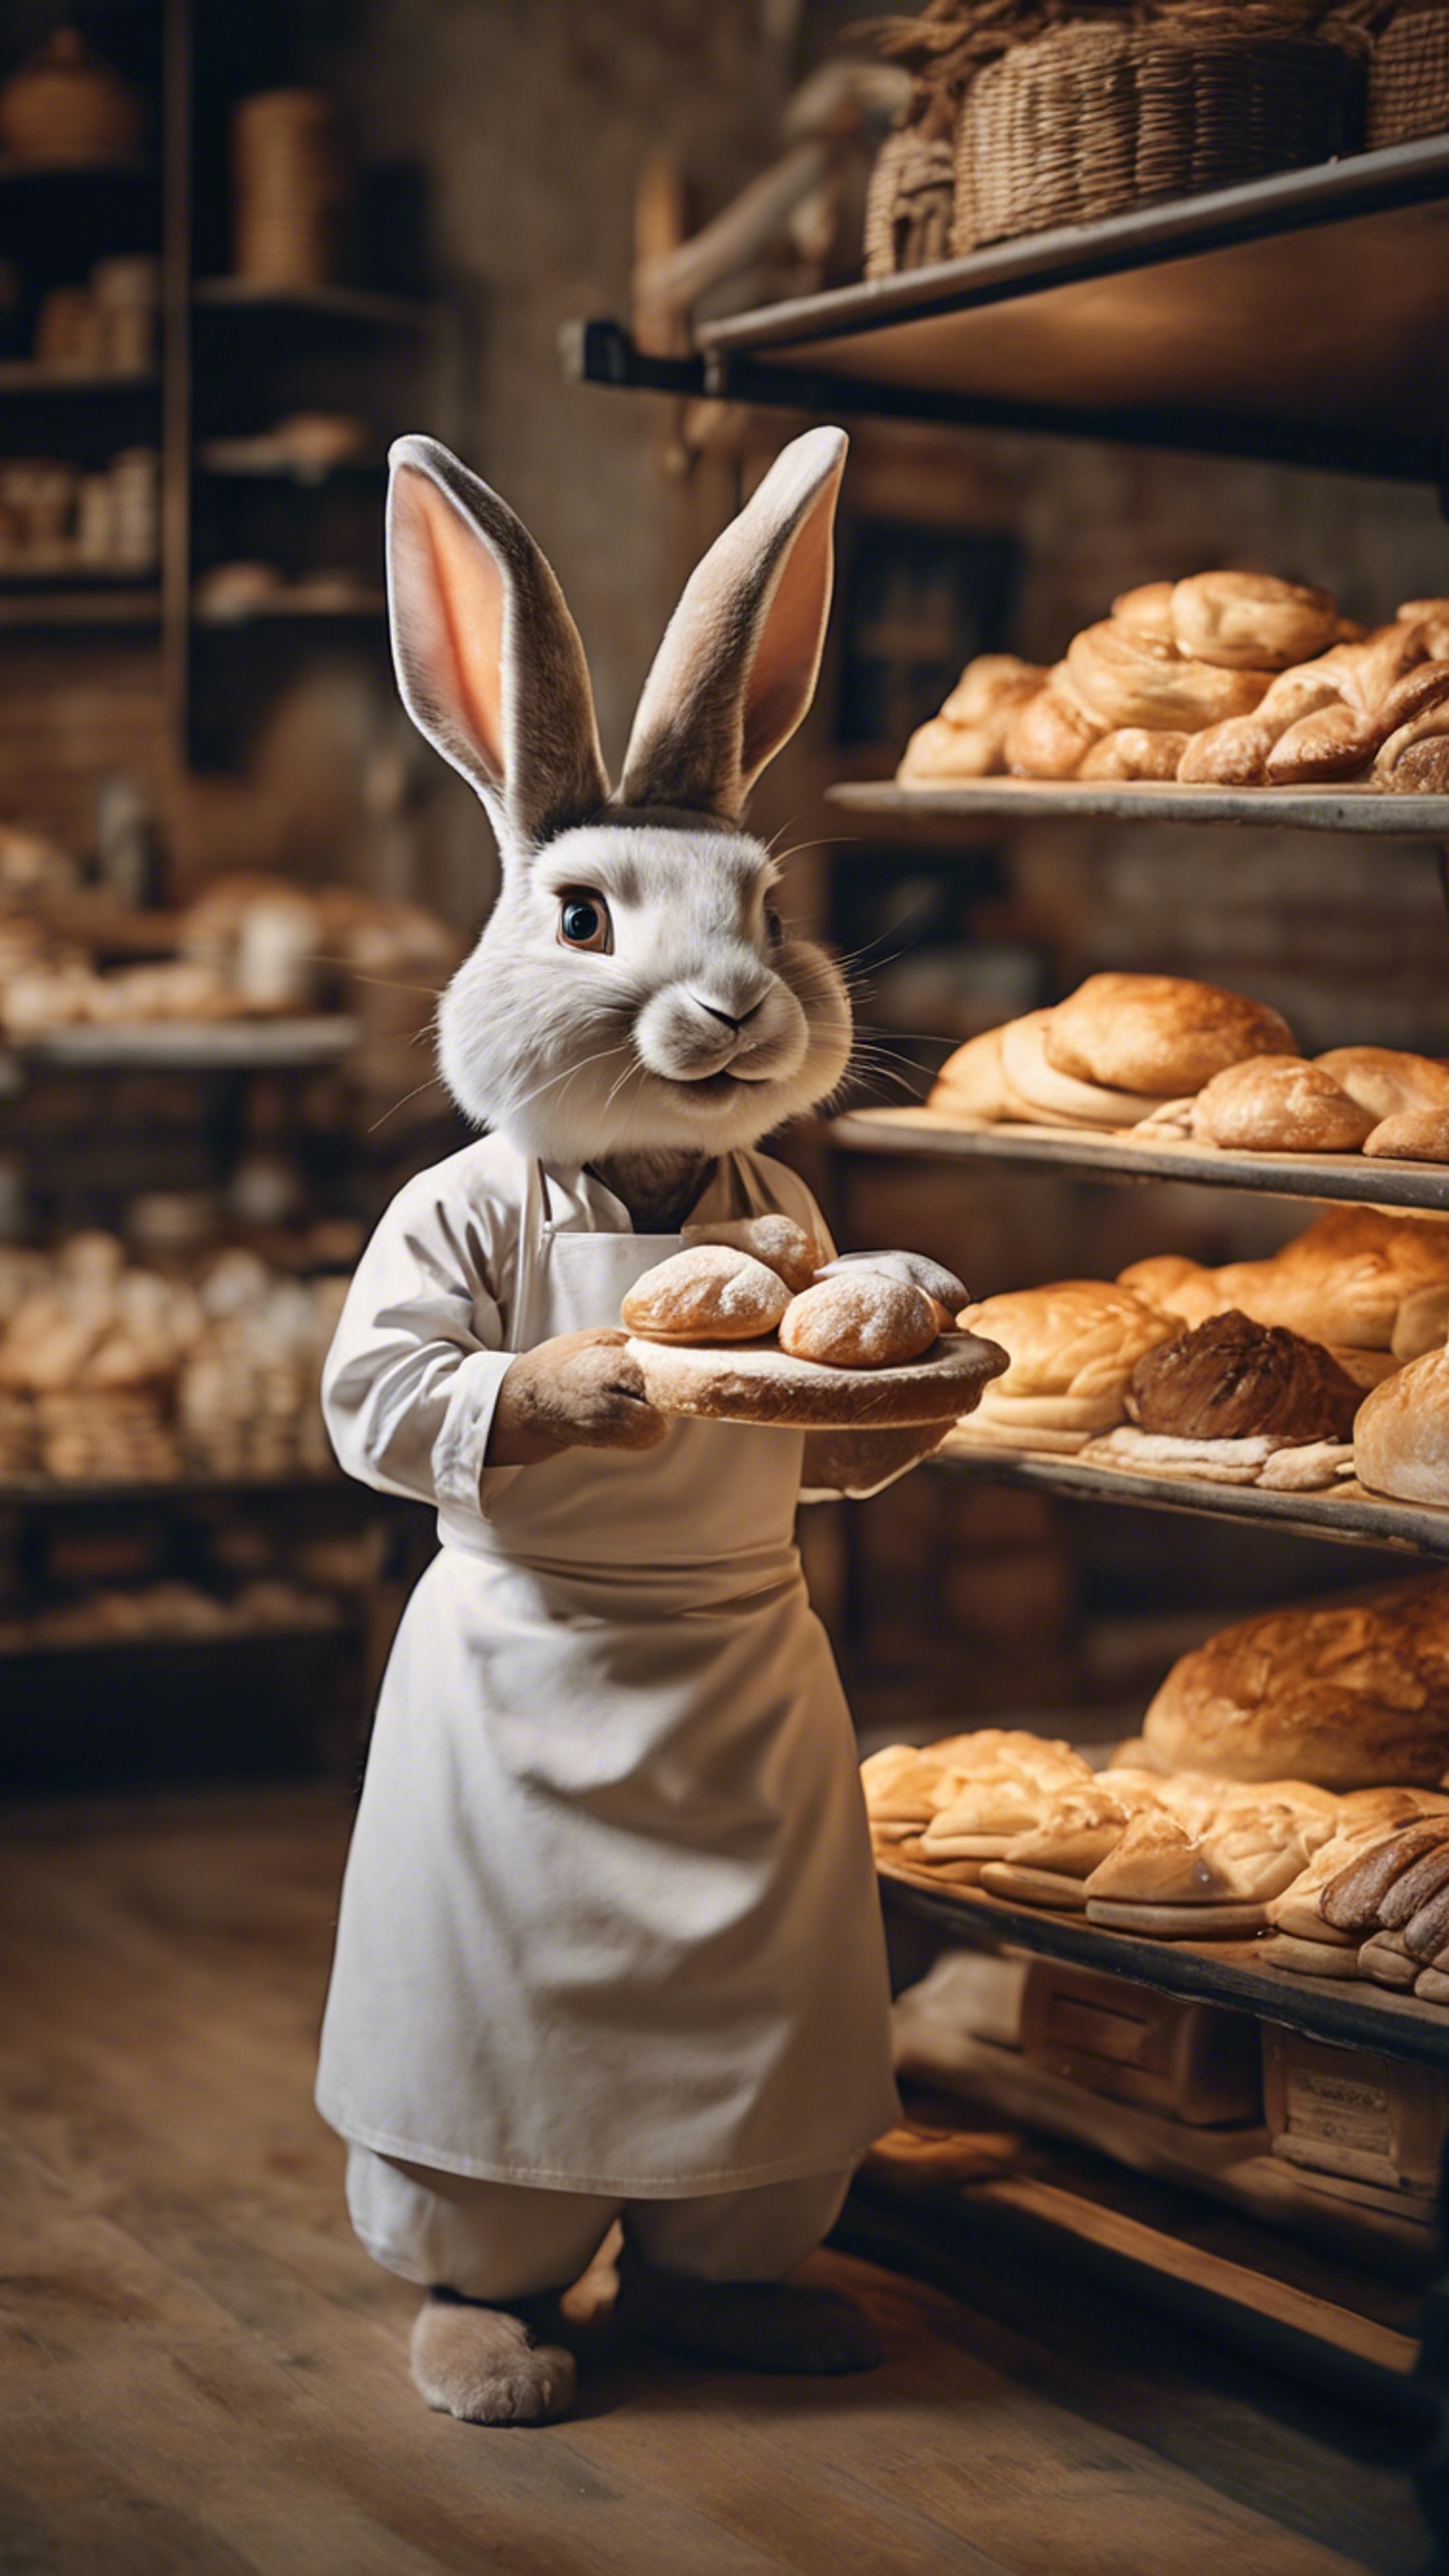 A rabbit baker displaying freshly-baked goods in a charming bakery. Wallpaper[908b61b6762c4c248f7e]